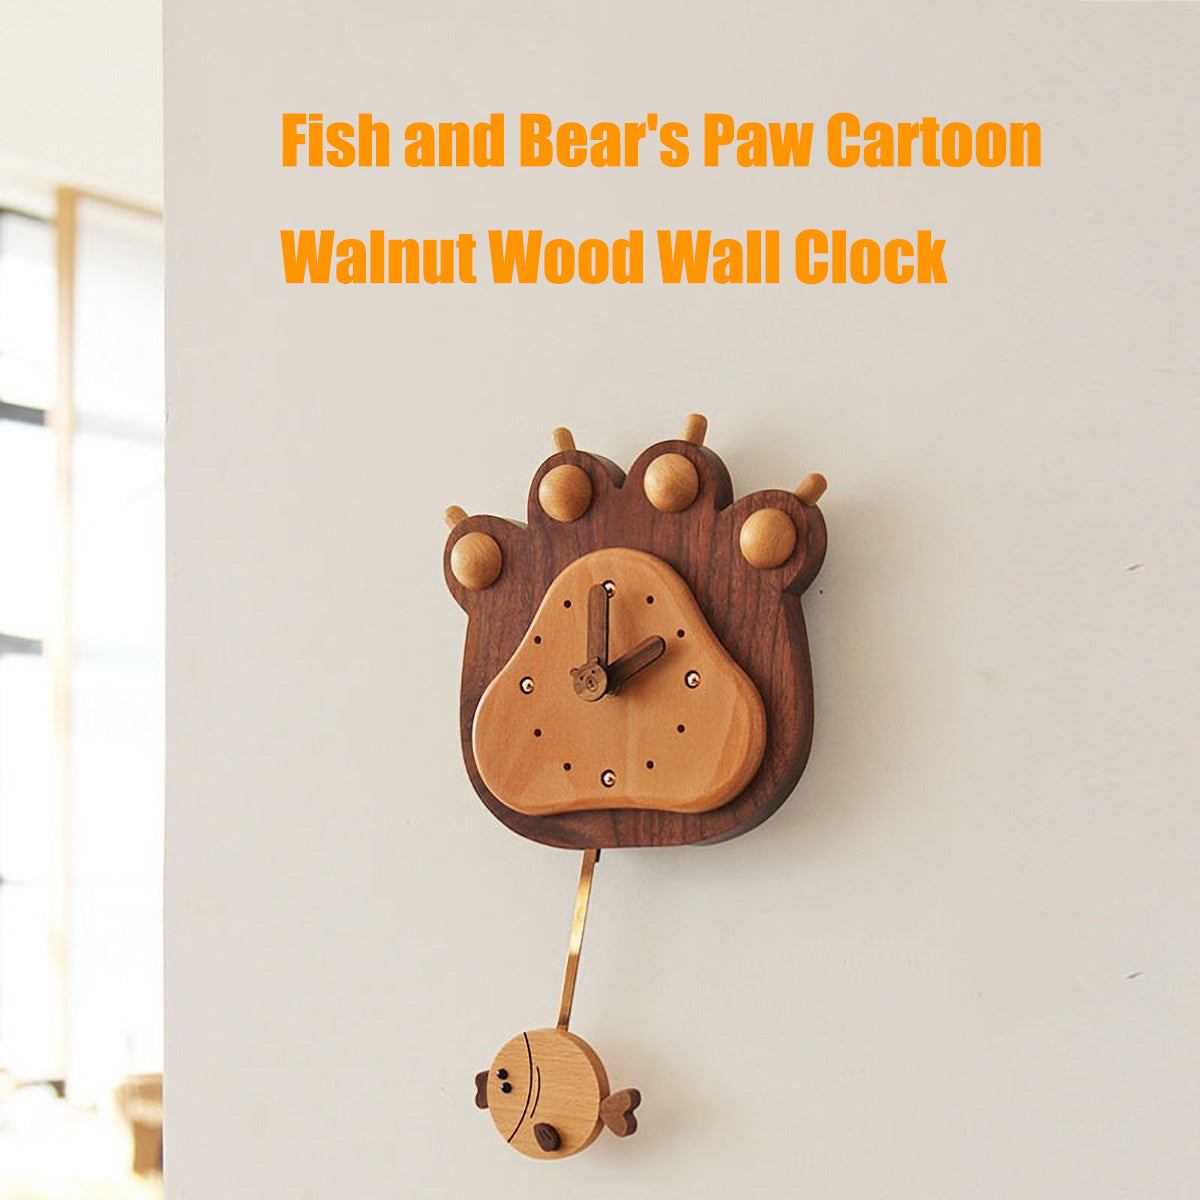 Cartoon Wall Clock with Fish and Bear Paw Design, Made of Walnut Wood - Mike Uncle